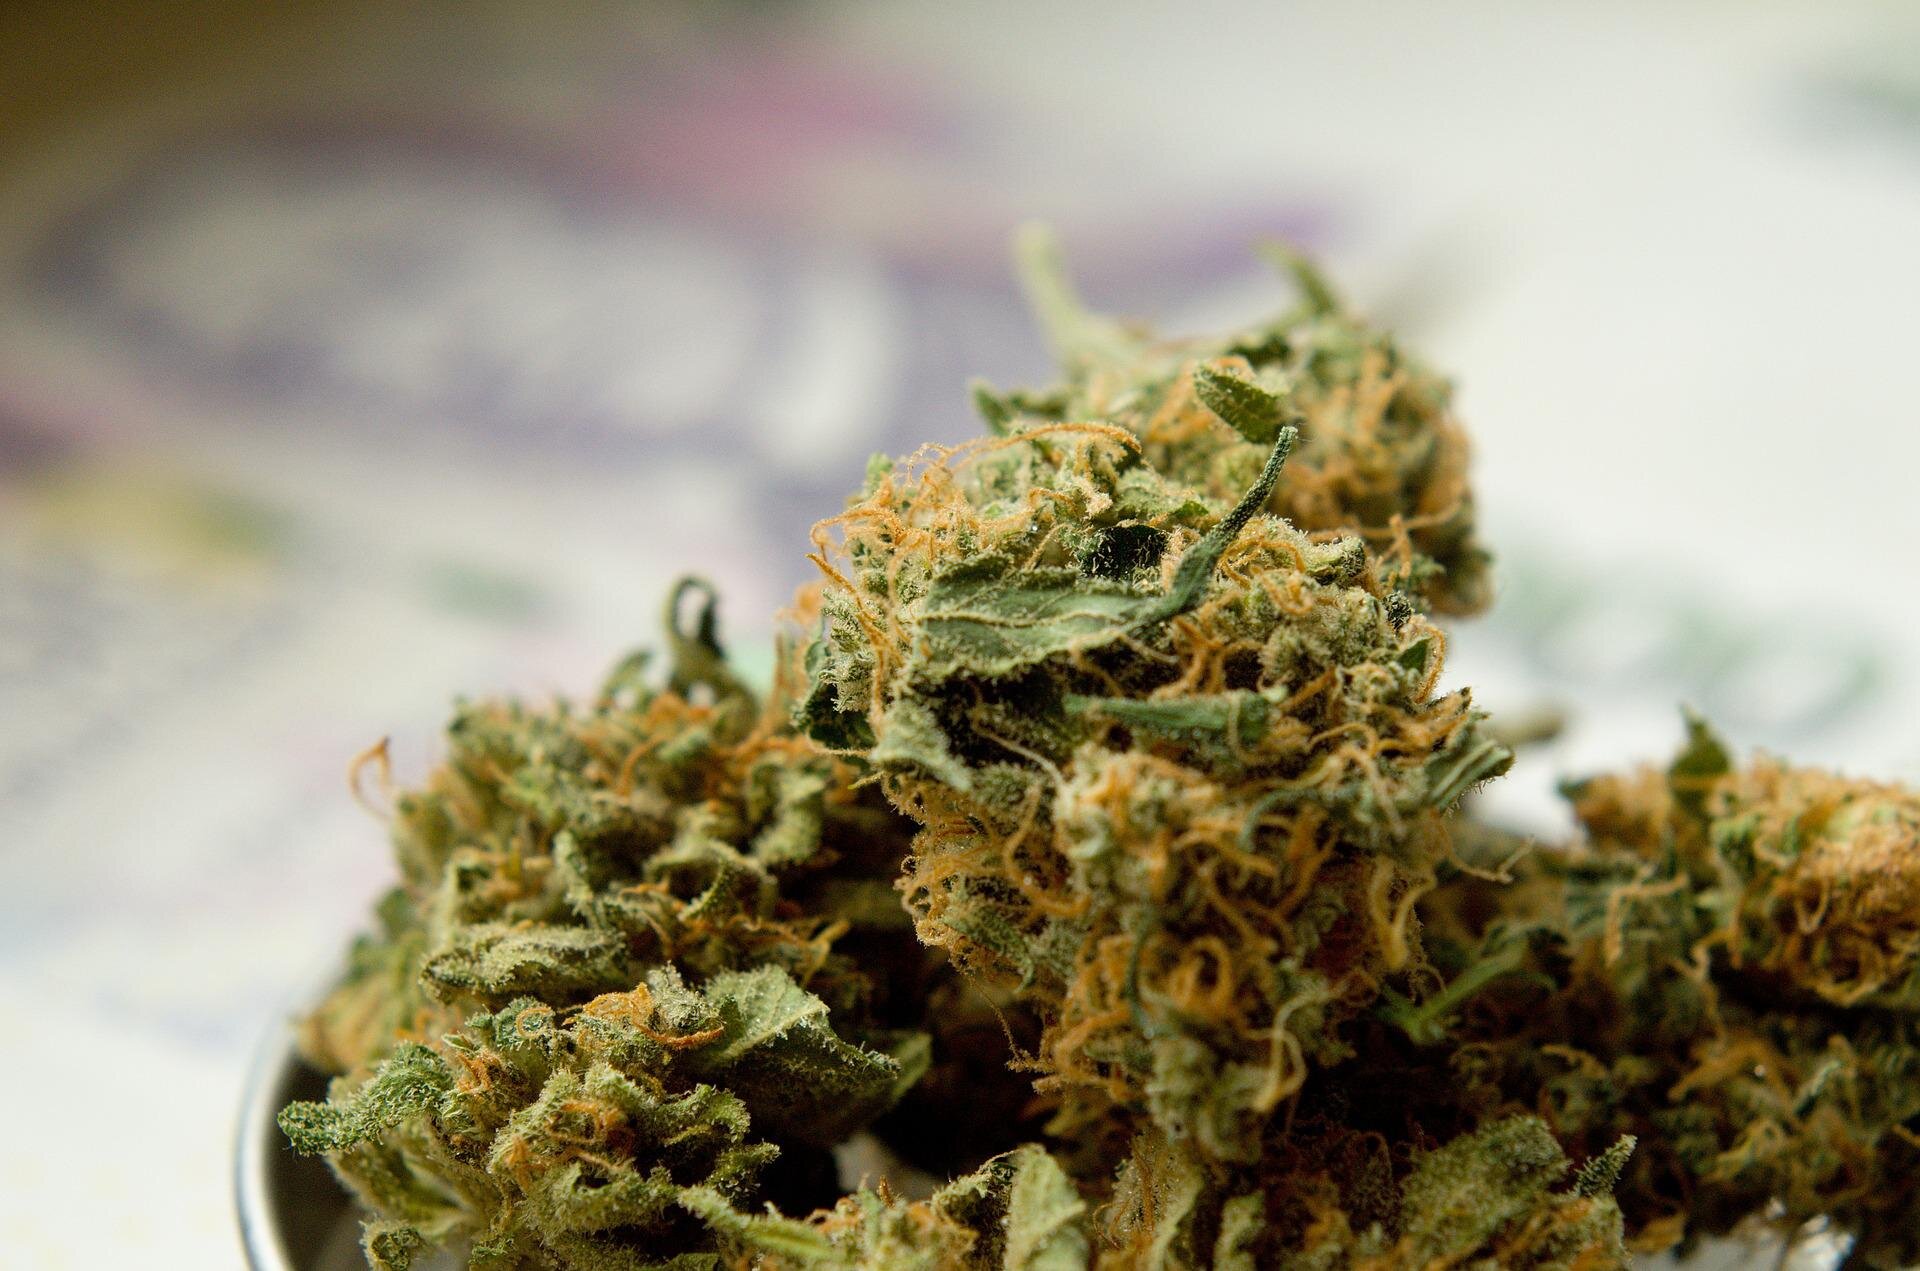 Legalized cannabis linked to fewer synthetic cannabinoid poisonings